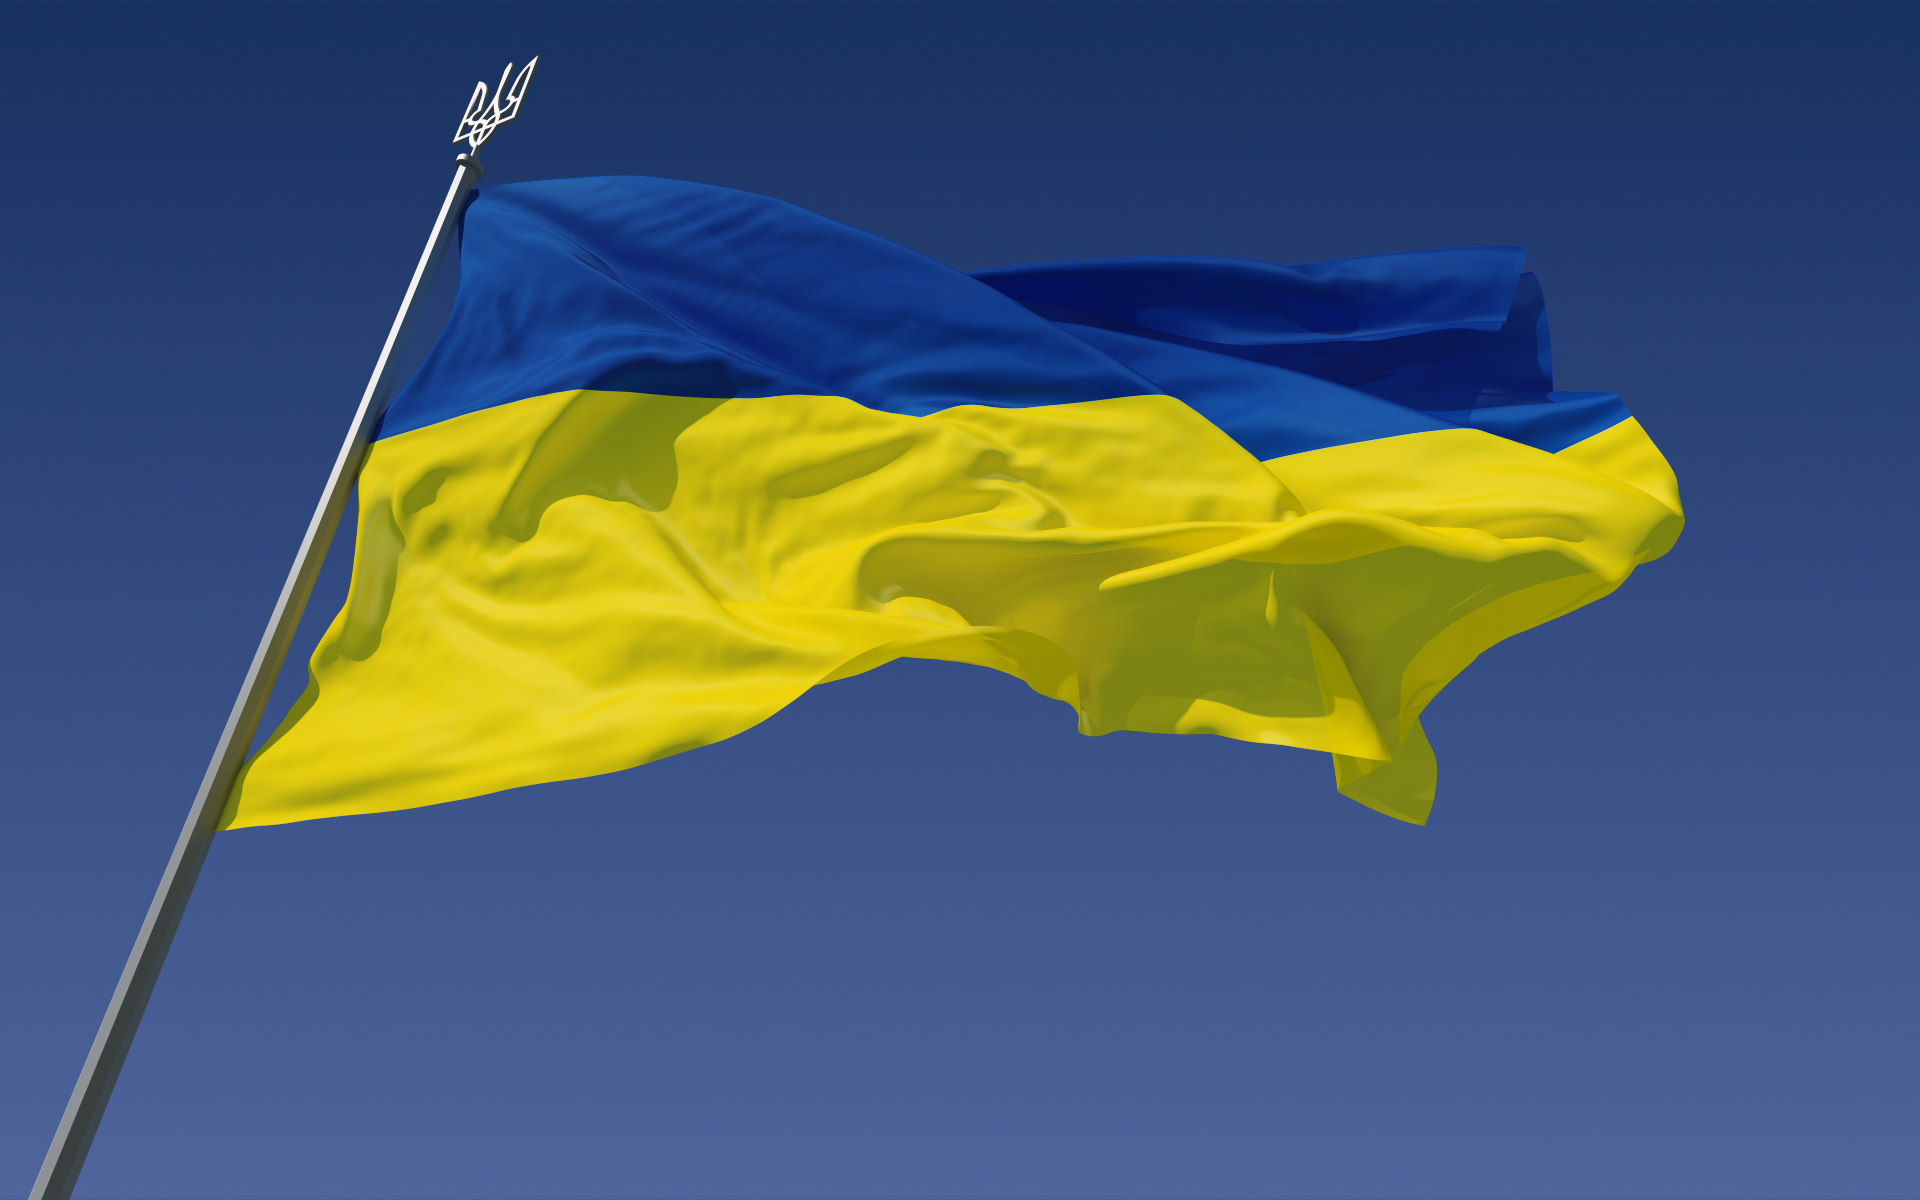 The Warsaw Institute stands united with Ukraine